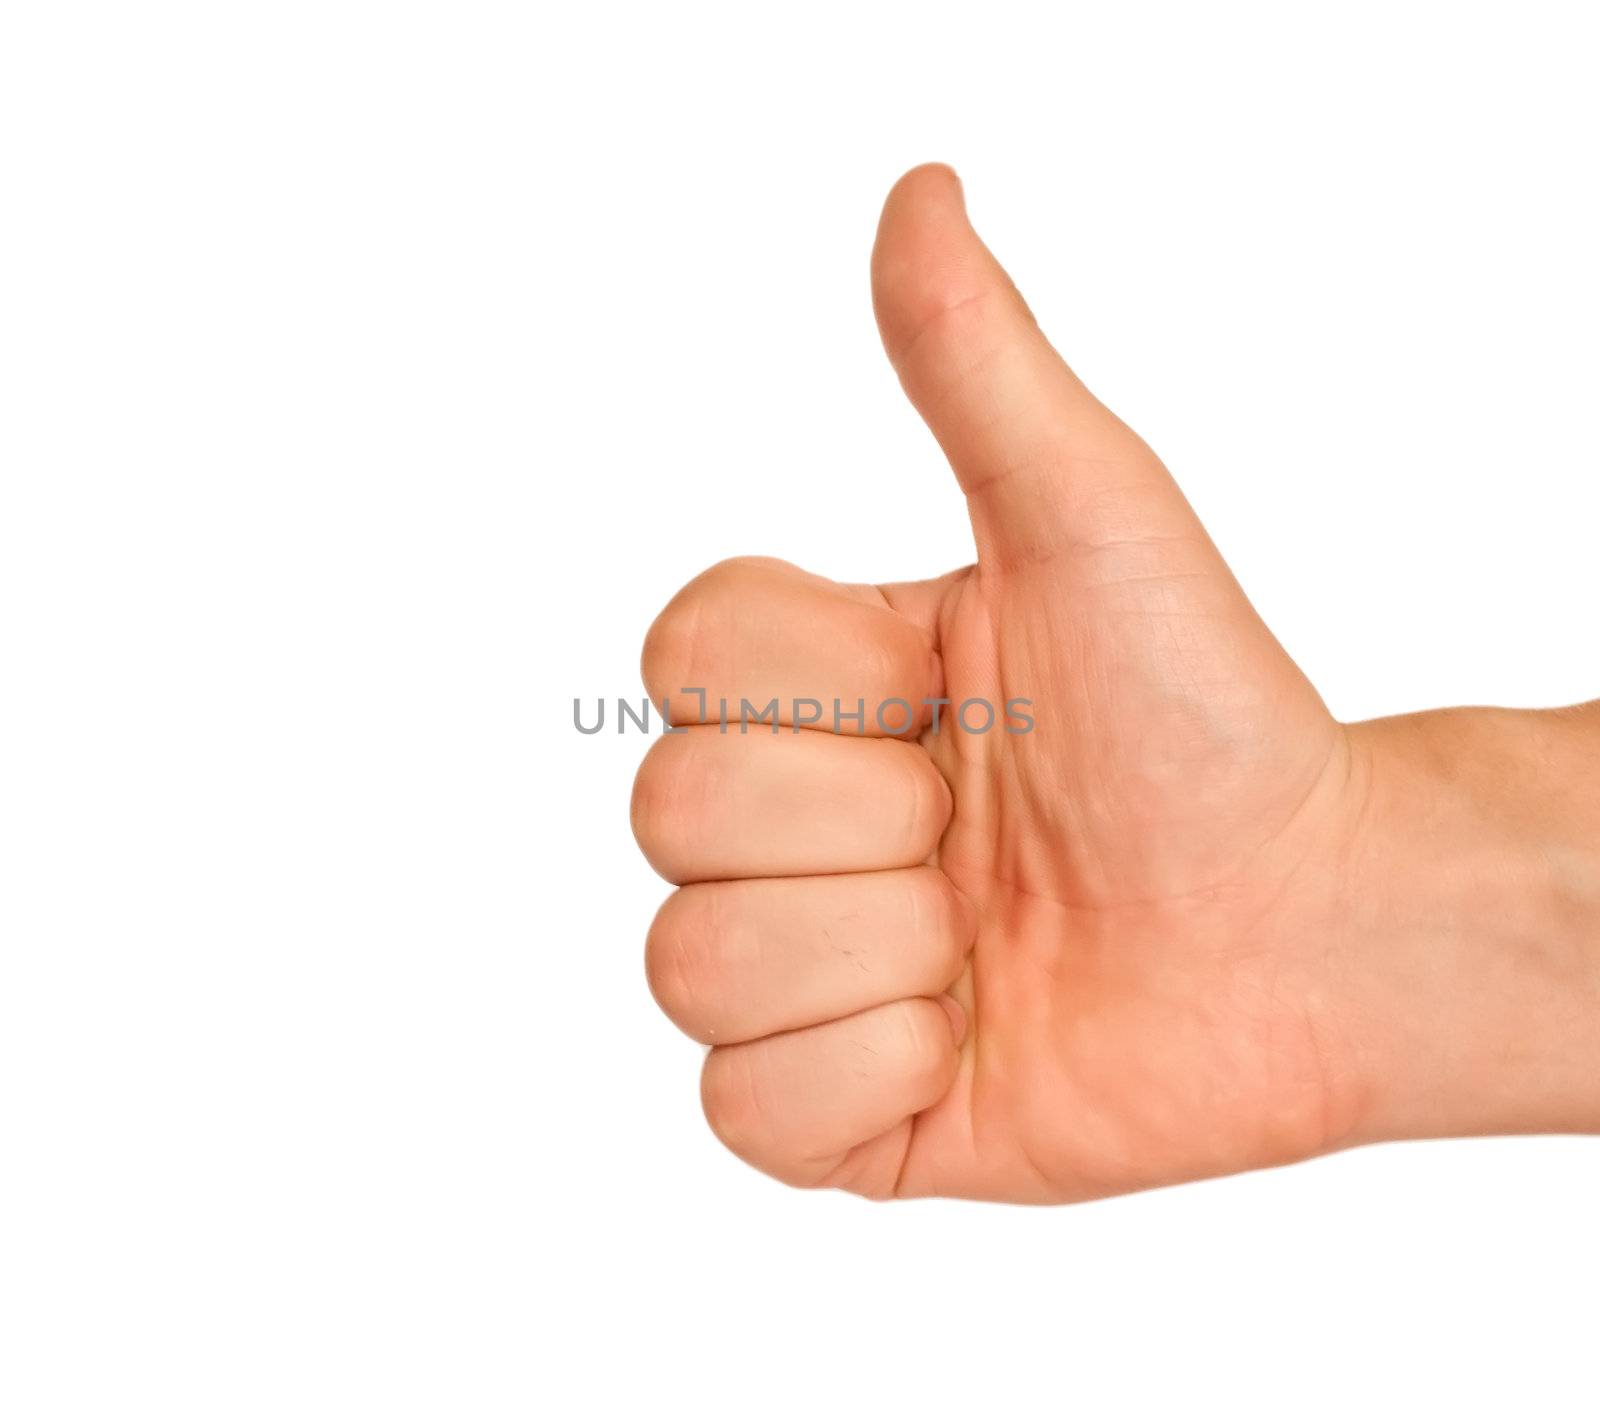 The thumb lifted upwards on a white background